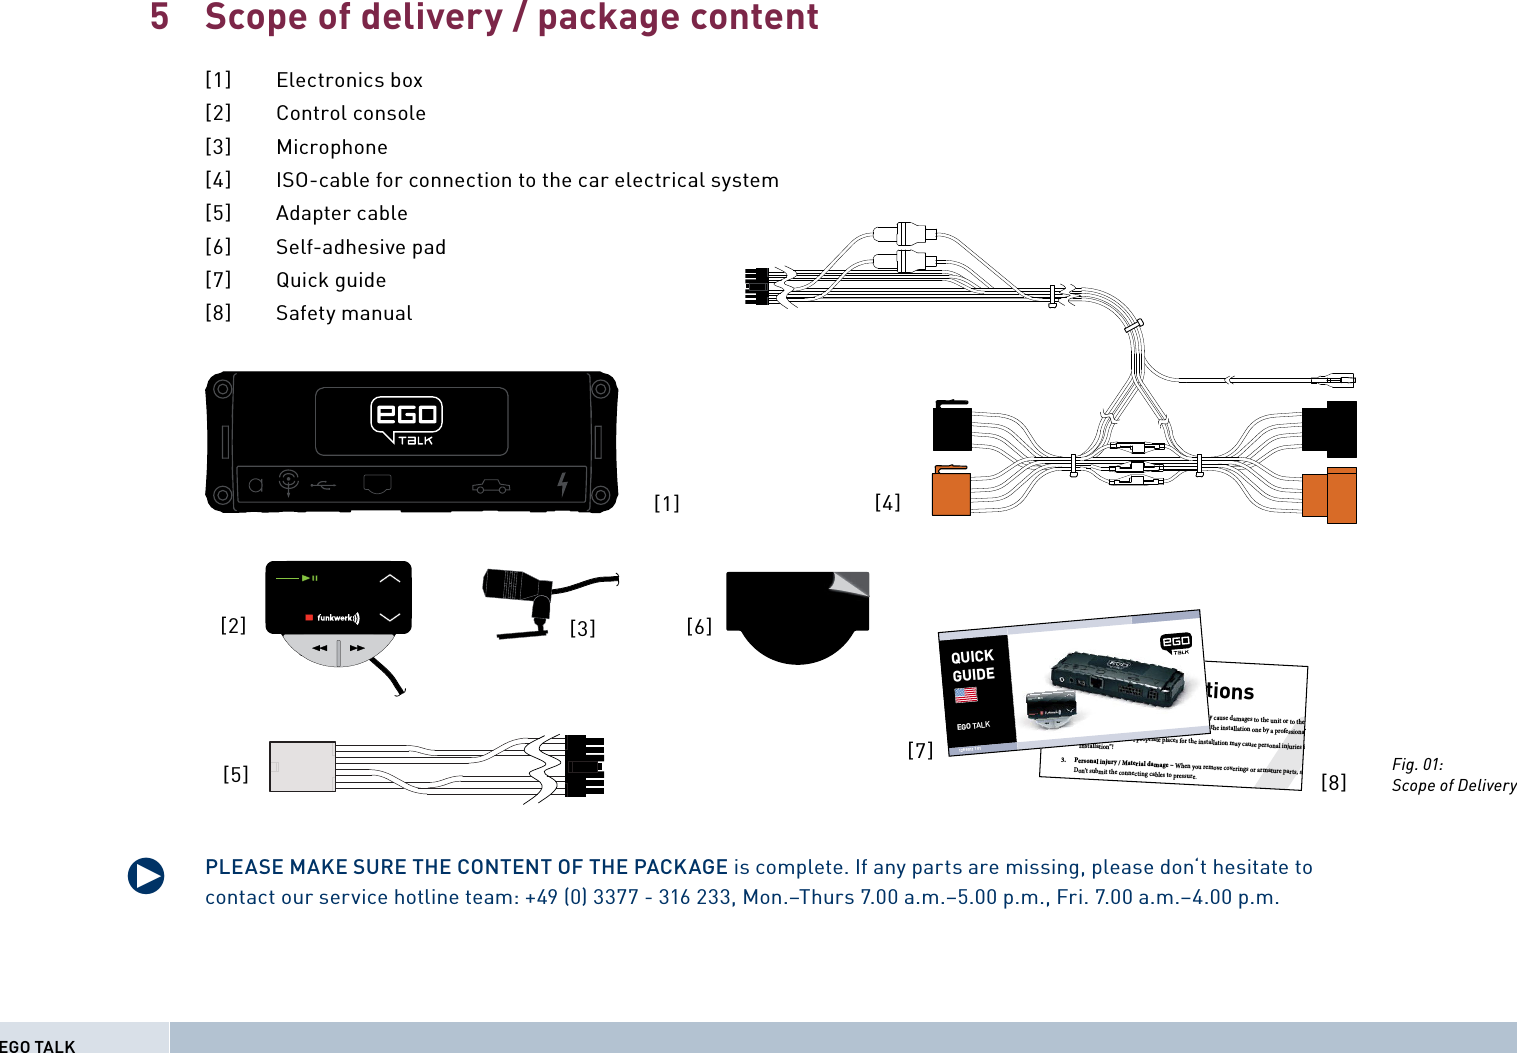 Scope of delivery / package content[1] Electronics box[2] Control console[3] Microphone[4]  ISO-cable for connection to the car electrical system[5] Adapter cable[6] Self-adhesive pad [7] Quick guide [8] Safety manualPLEASE MAKE SURE THE CONTENT OF THE PACKAGE is complete. If any parts are missing, please don‘t hesitate to contact our service hotline team: +49 (0) 3377 - 316 233, Mon.–Thurs 7.00 a.m.–5.00 p.m., Fri. 7.00 a.m.–4.00 p.m.5q[1][2] [3]Safety Instructions1. Improper installation – Improper installation may cause damages to the unit or to the v  abilities. We therefore strongly recommend to have the installation one by a professional.2. Personal injury – Inappropriate places for the installation may cause personal injuries in  “Installation”!3. Personal injury / Material damage – When you remove coverings or armature parts, sha Don’t submit the connecting cables to pressure.4. Negative eects on road safety – Ta l kin g whi l t d i[7][8]QUICKGUIDEEGO TALK128 8011 1 01[4]Fig. 01:Scope of Delivery[5][6]EGO TALK